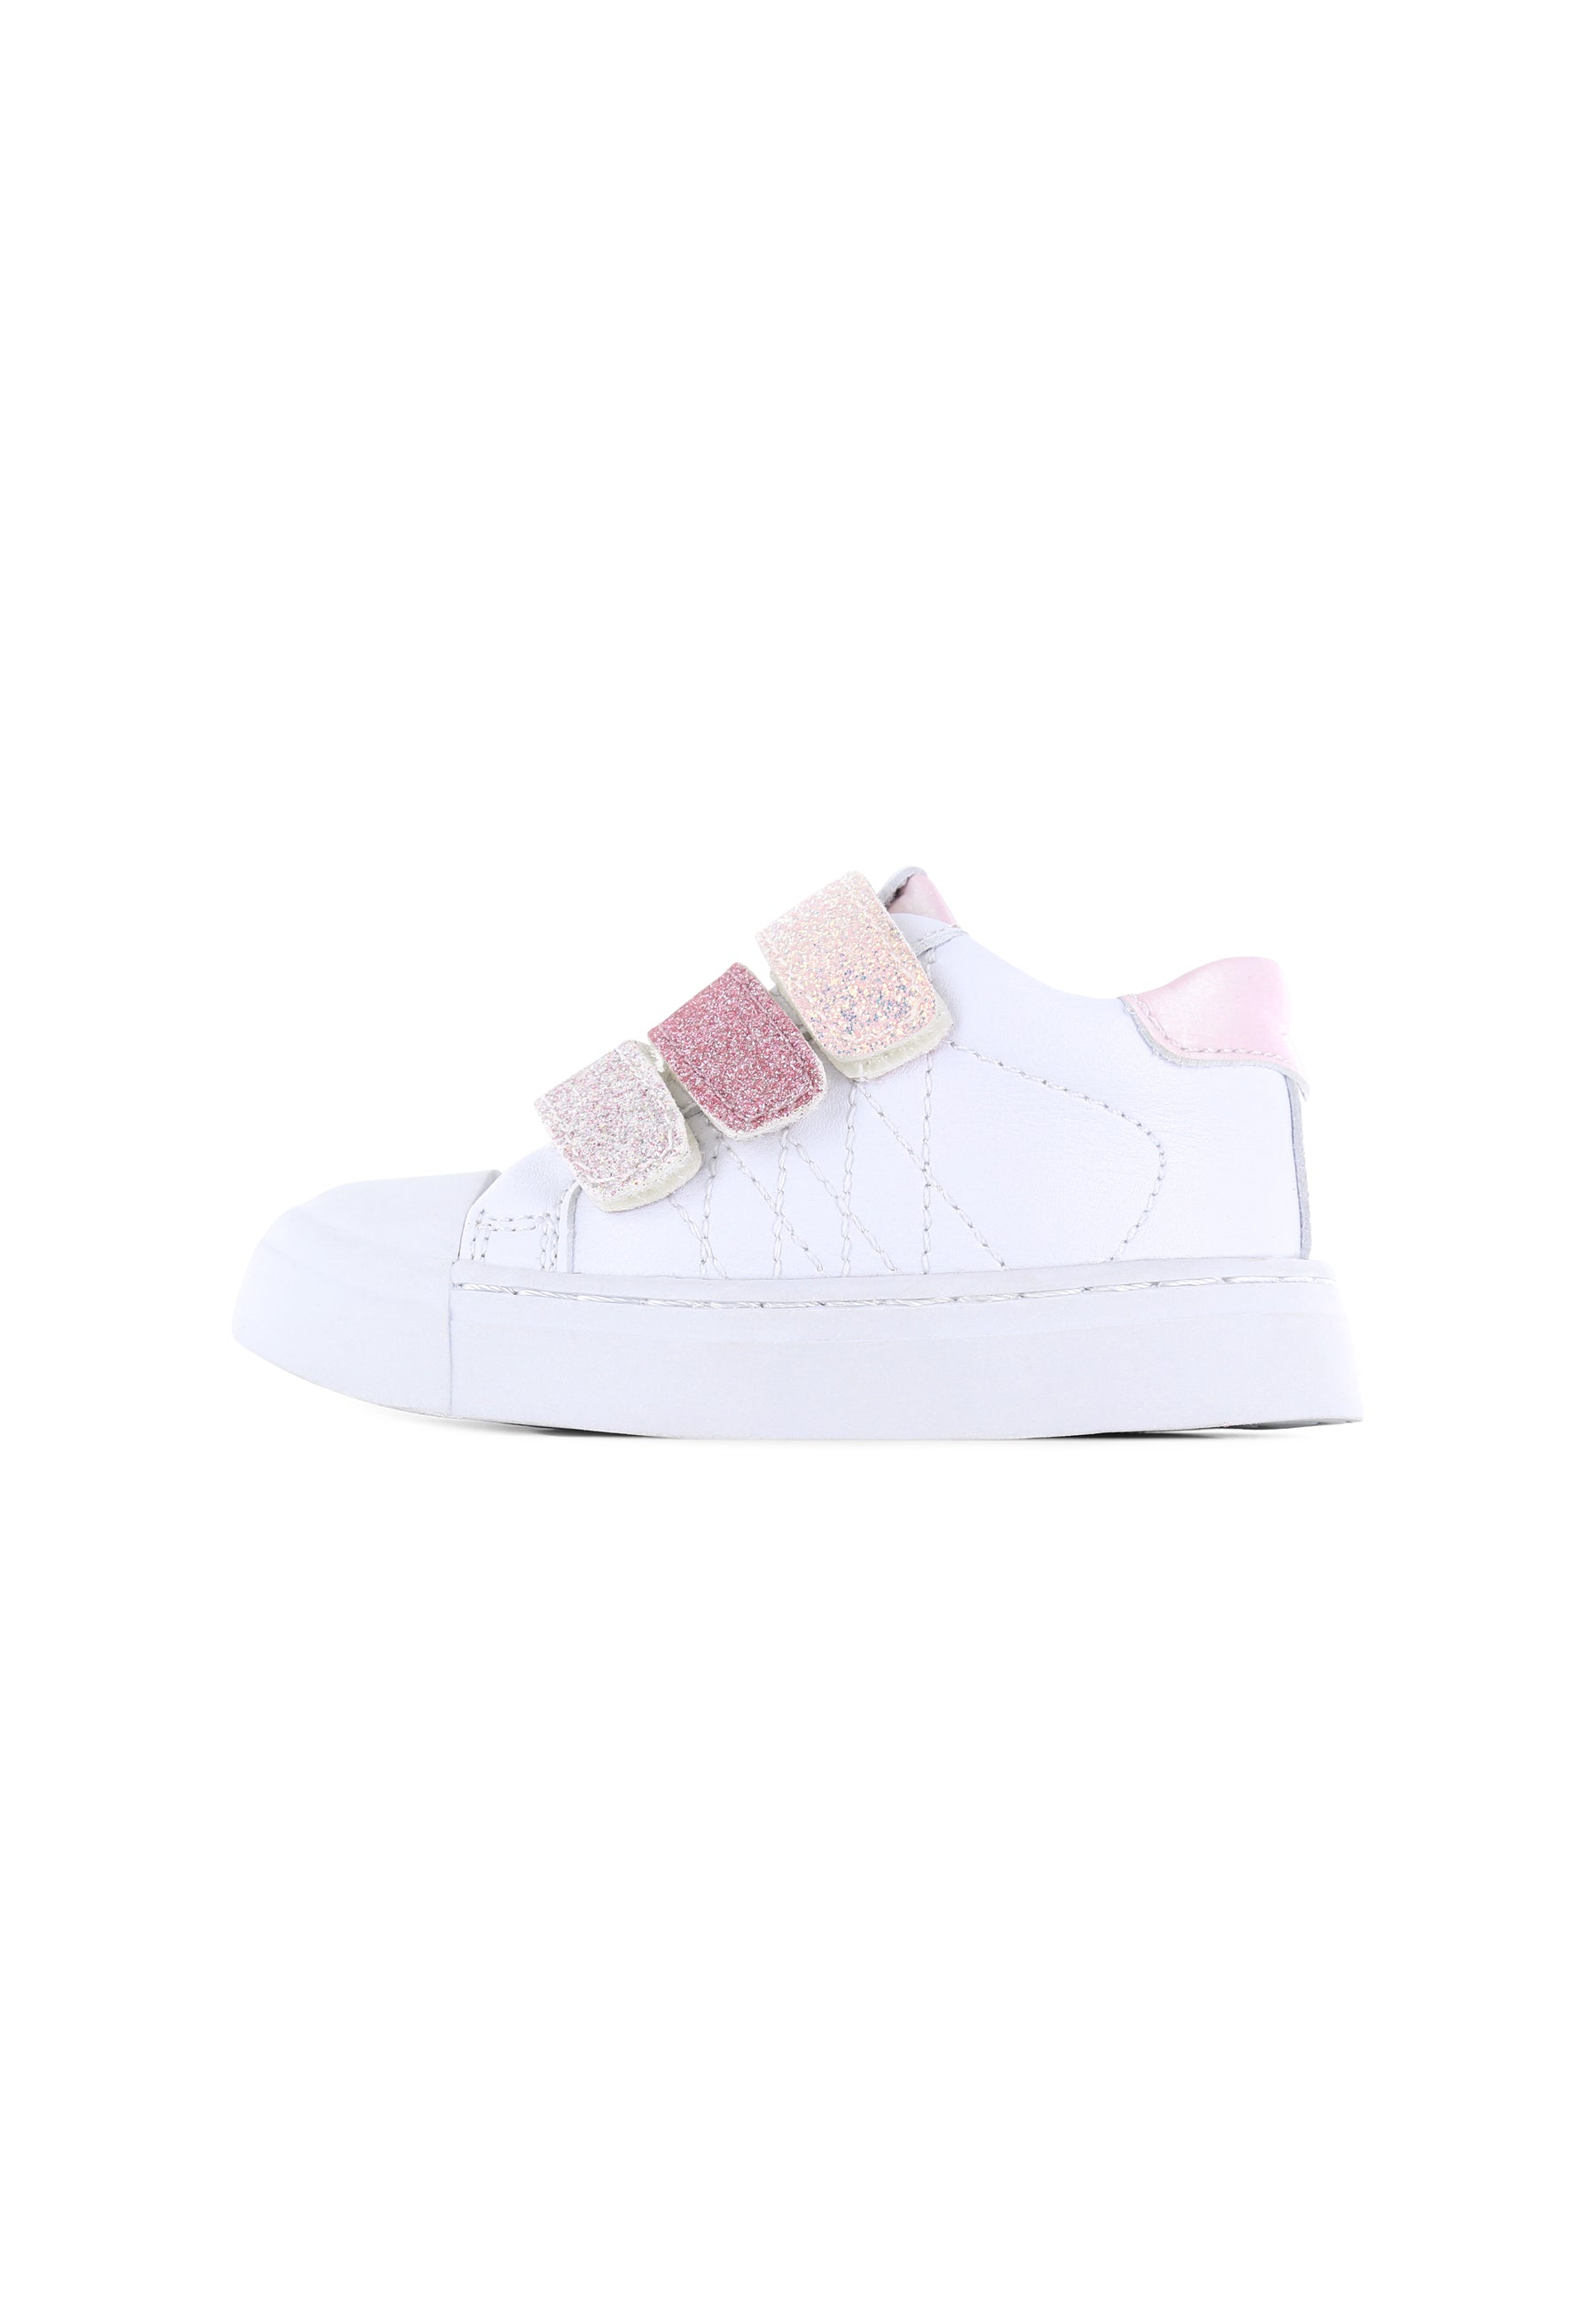 Shoesme - SH23S016-A - White Pink - Trainers